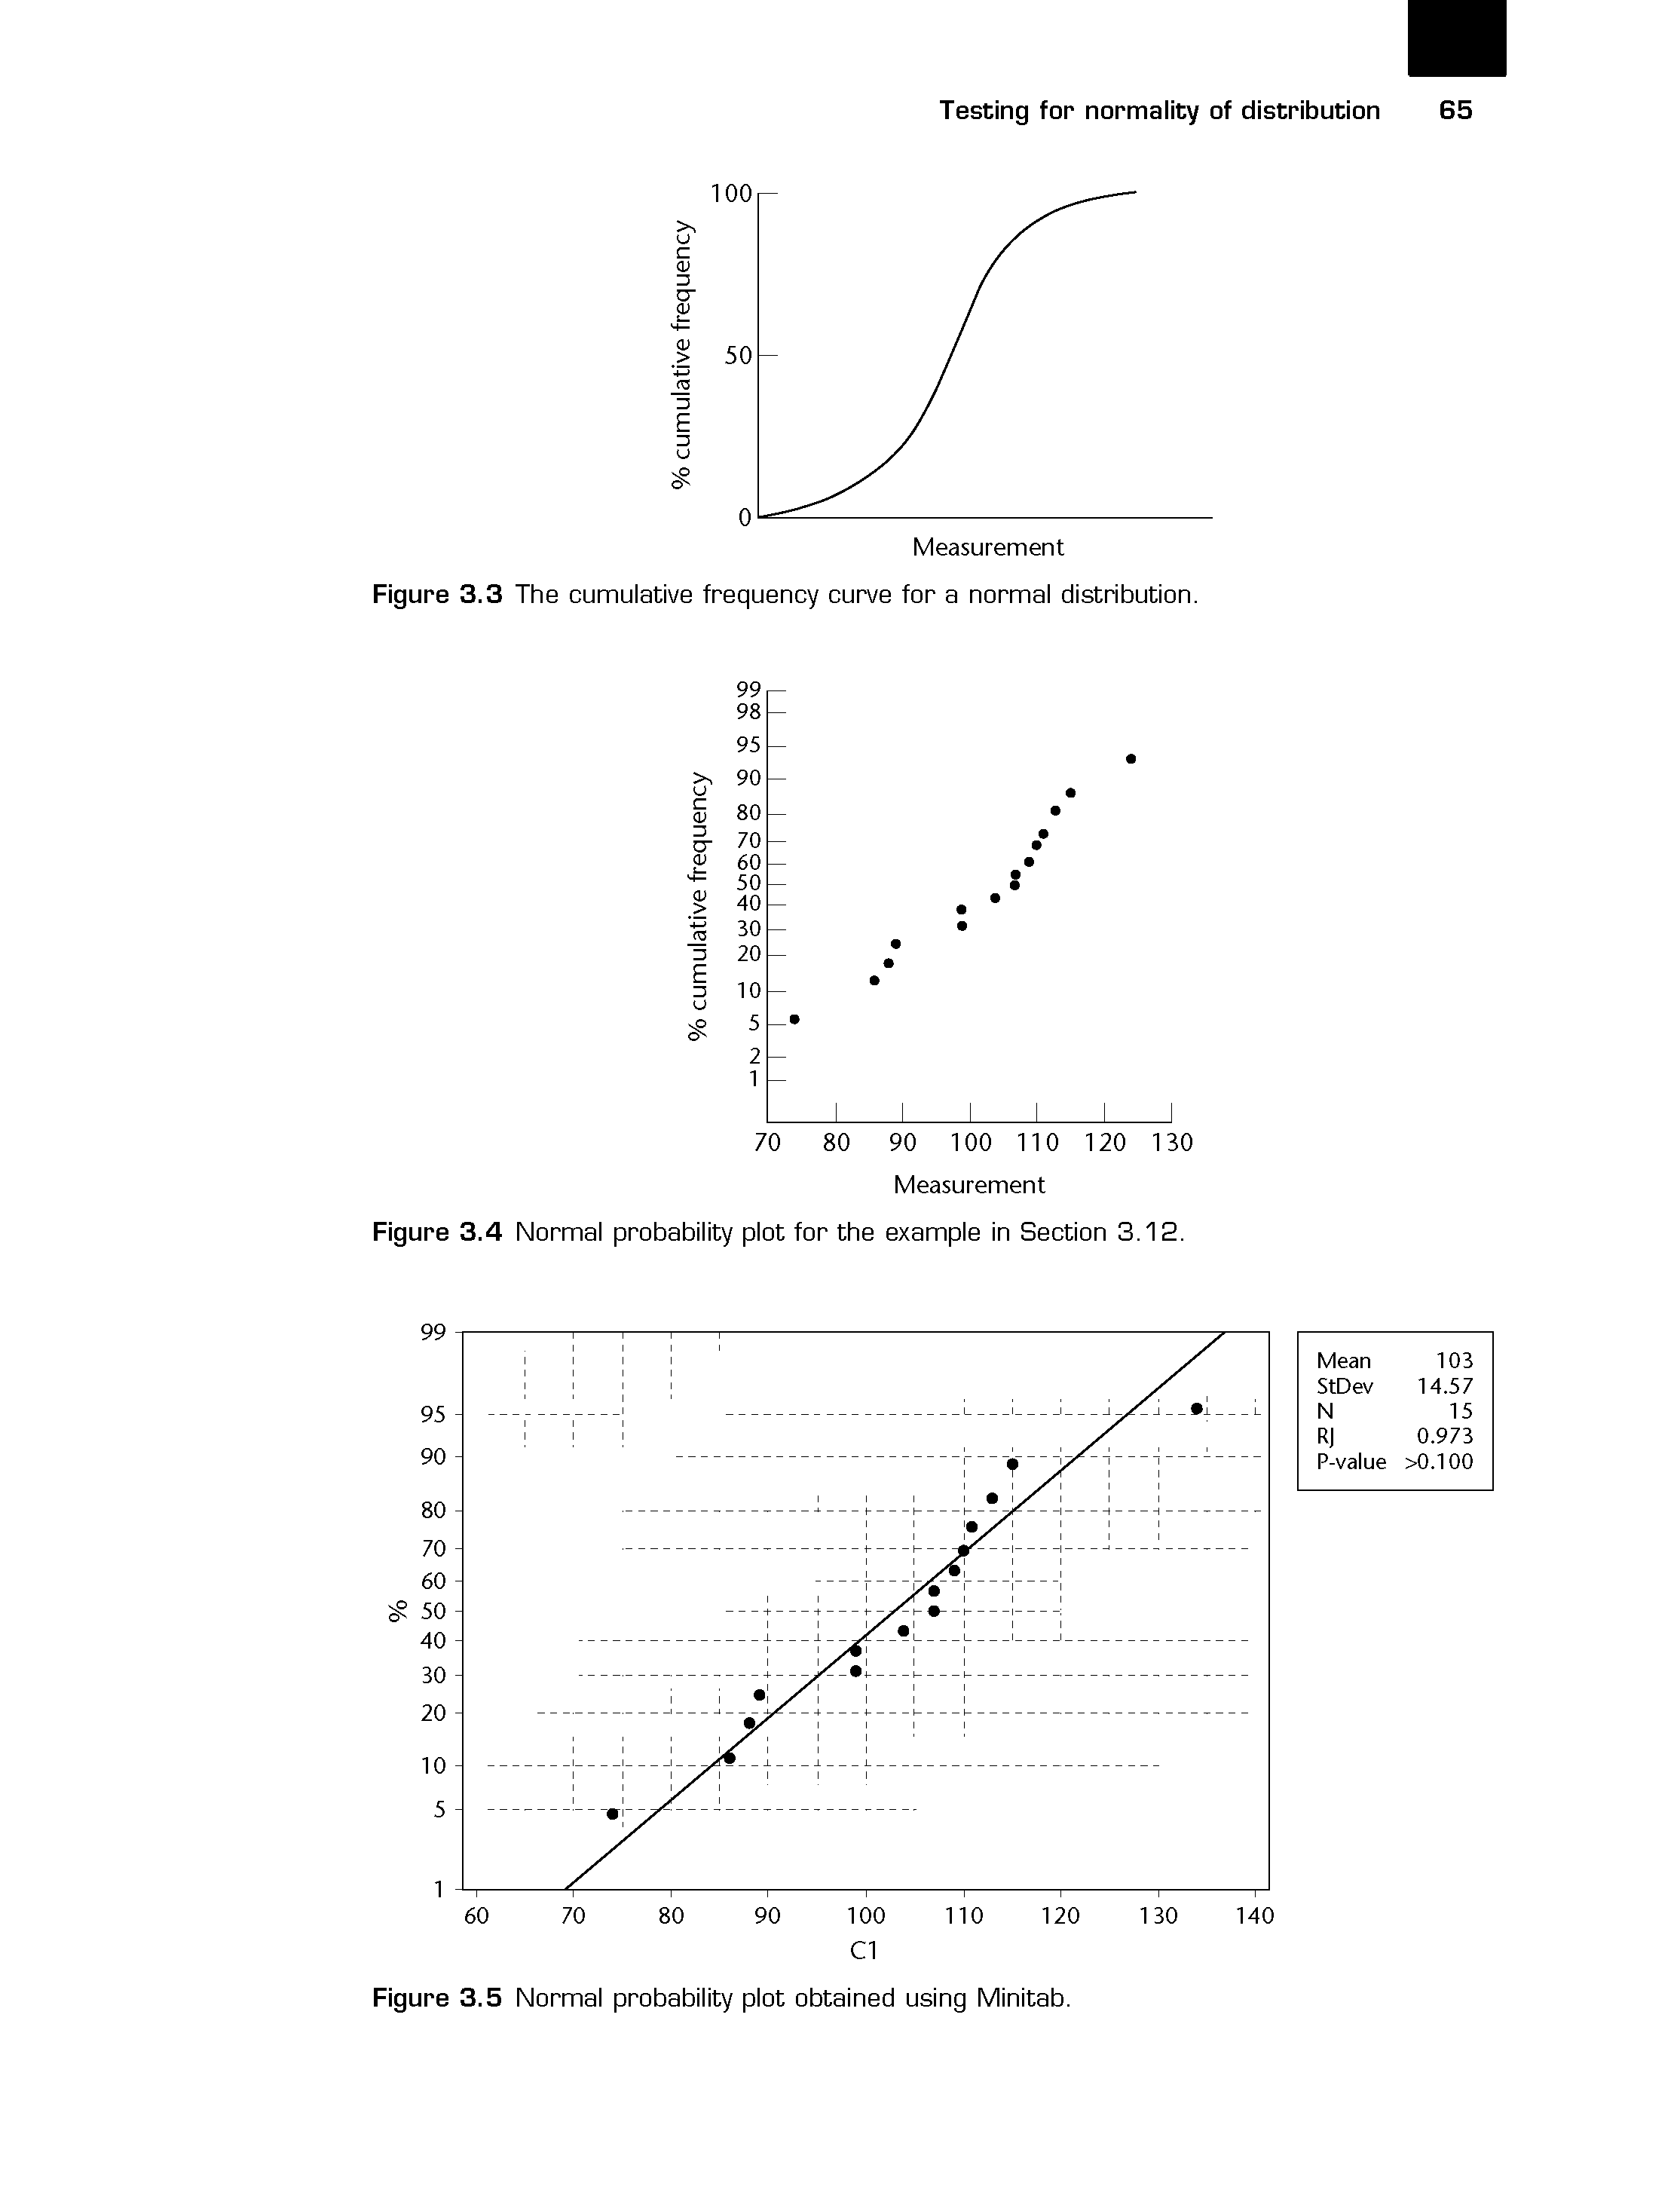 Figure 3.3 The cumulative frequency curve for a normal distribution.